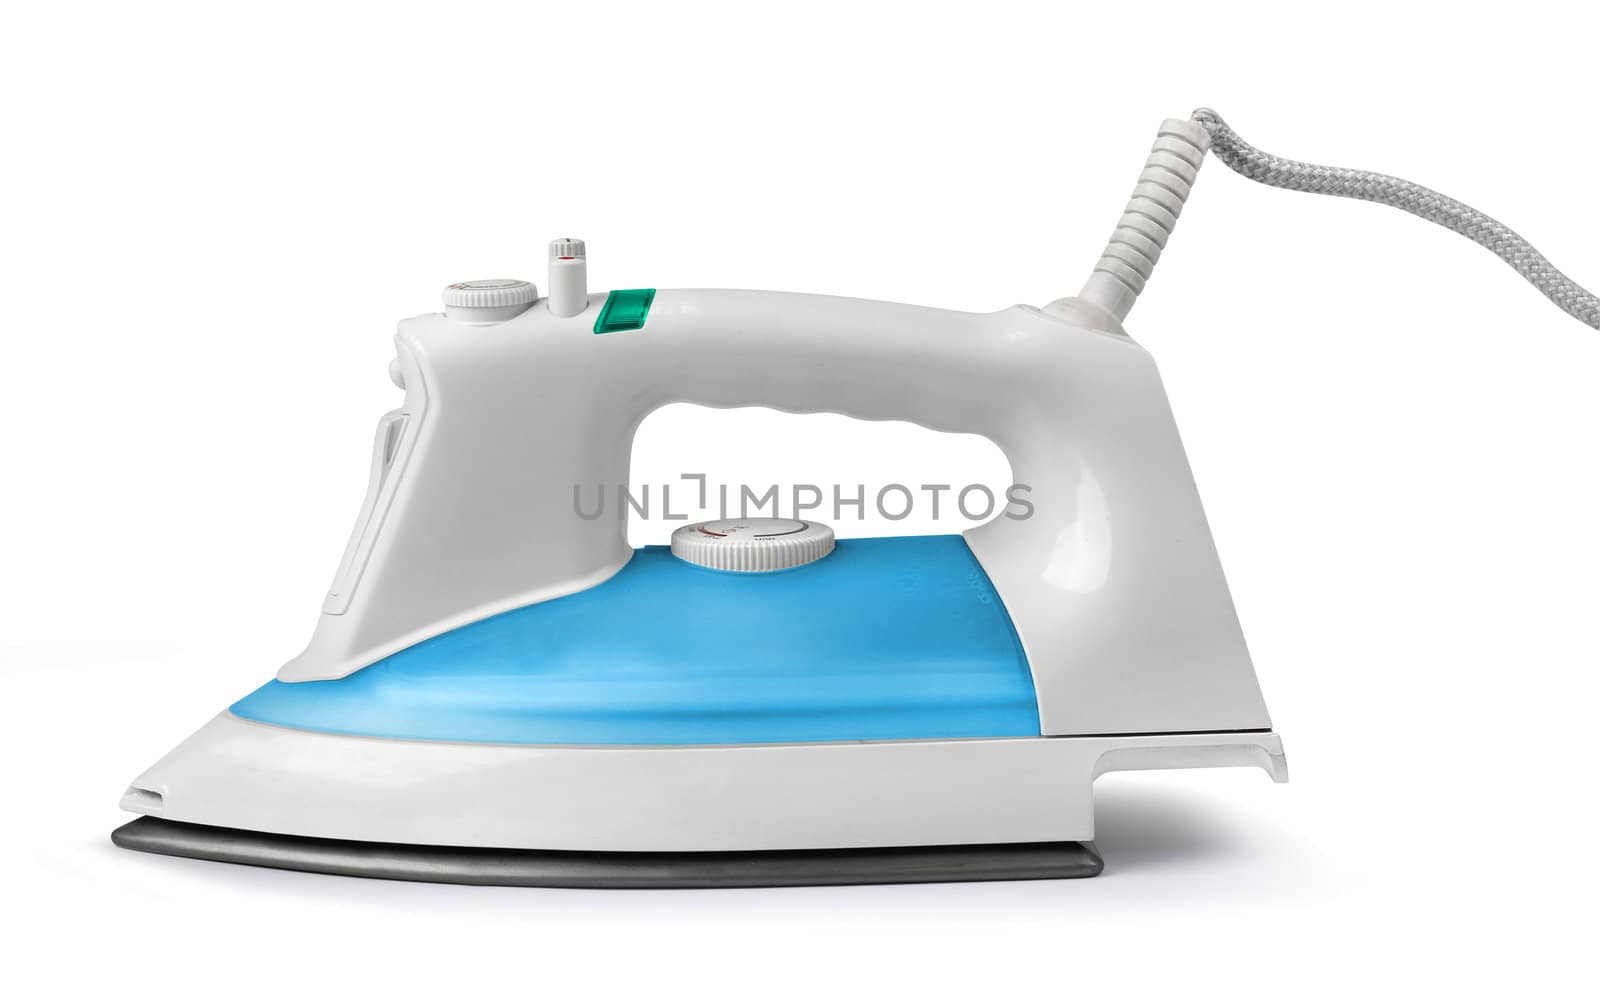 Modern steam flat-iron side view on white background isolated